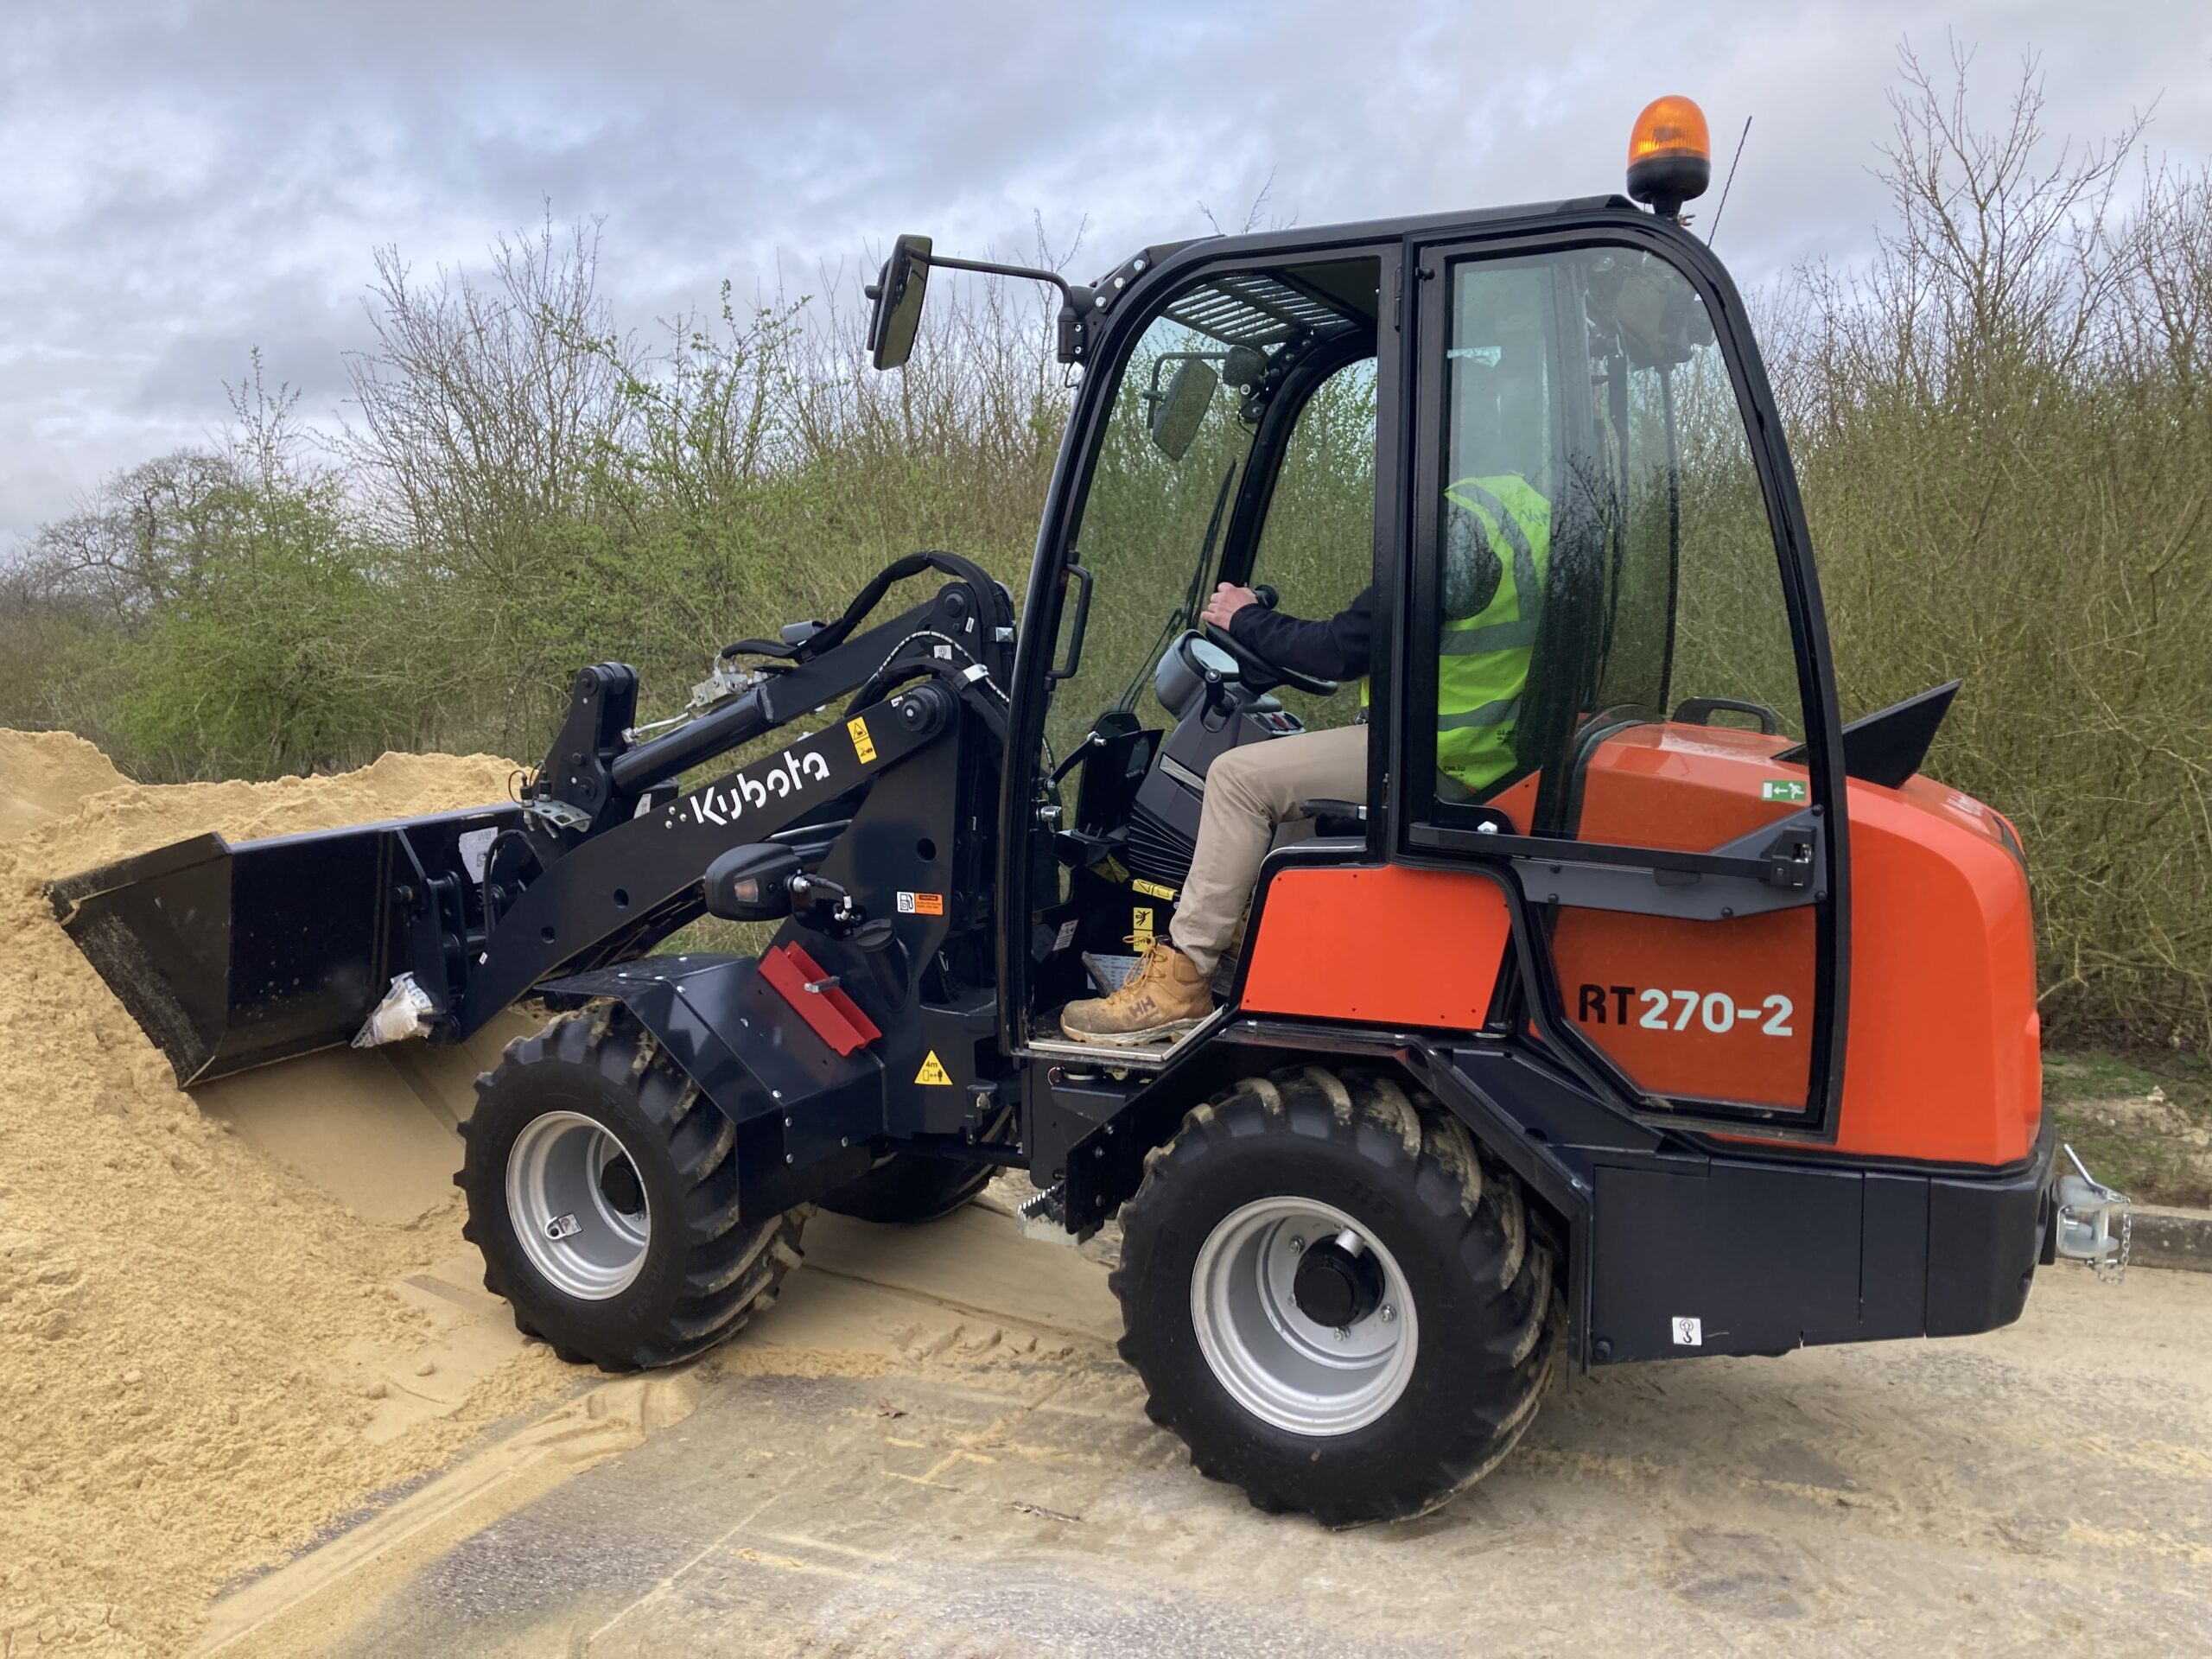 Kubota UK launches several compact machines to the market